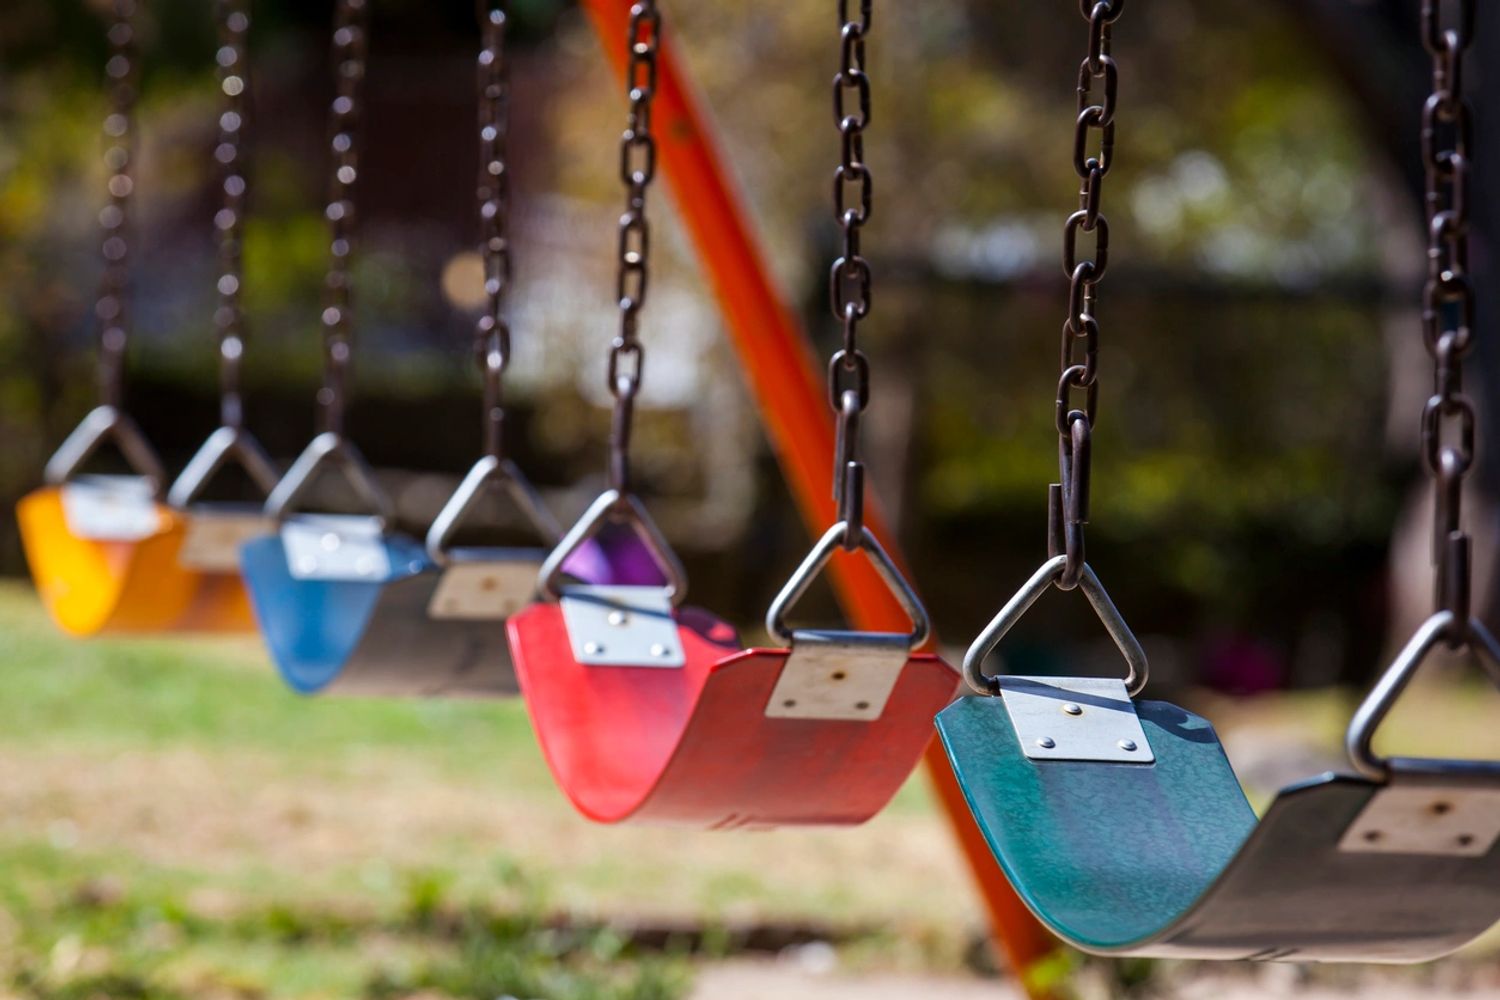 A series of colourful swings in a row against a background with greenery.